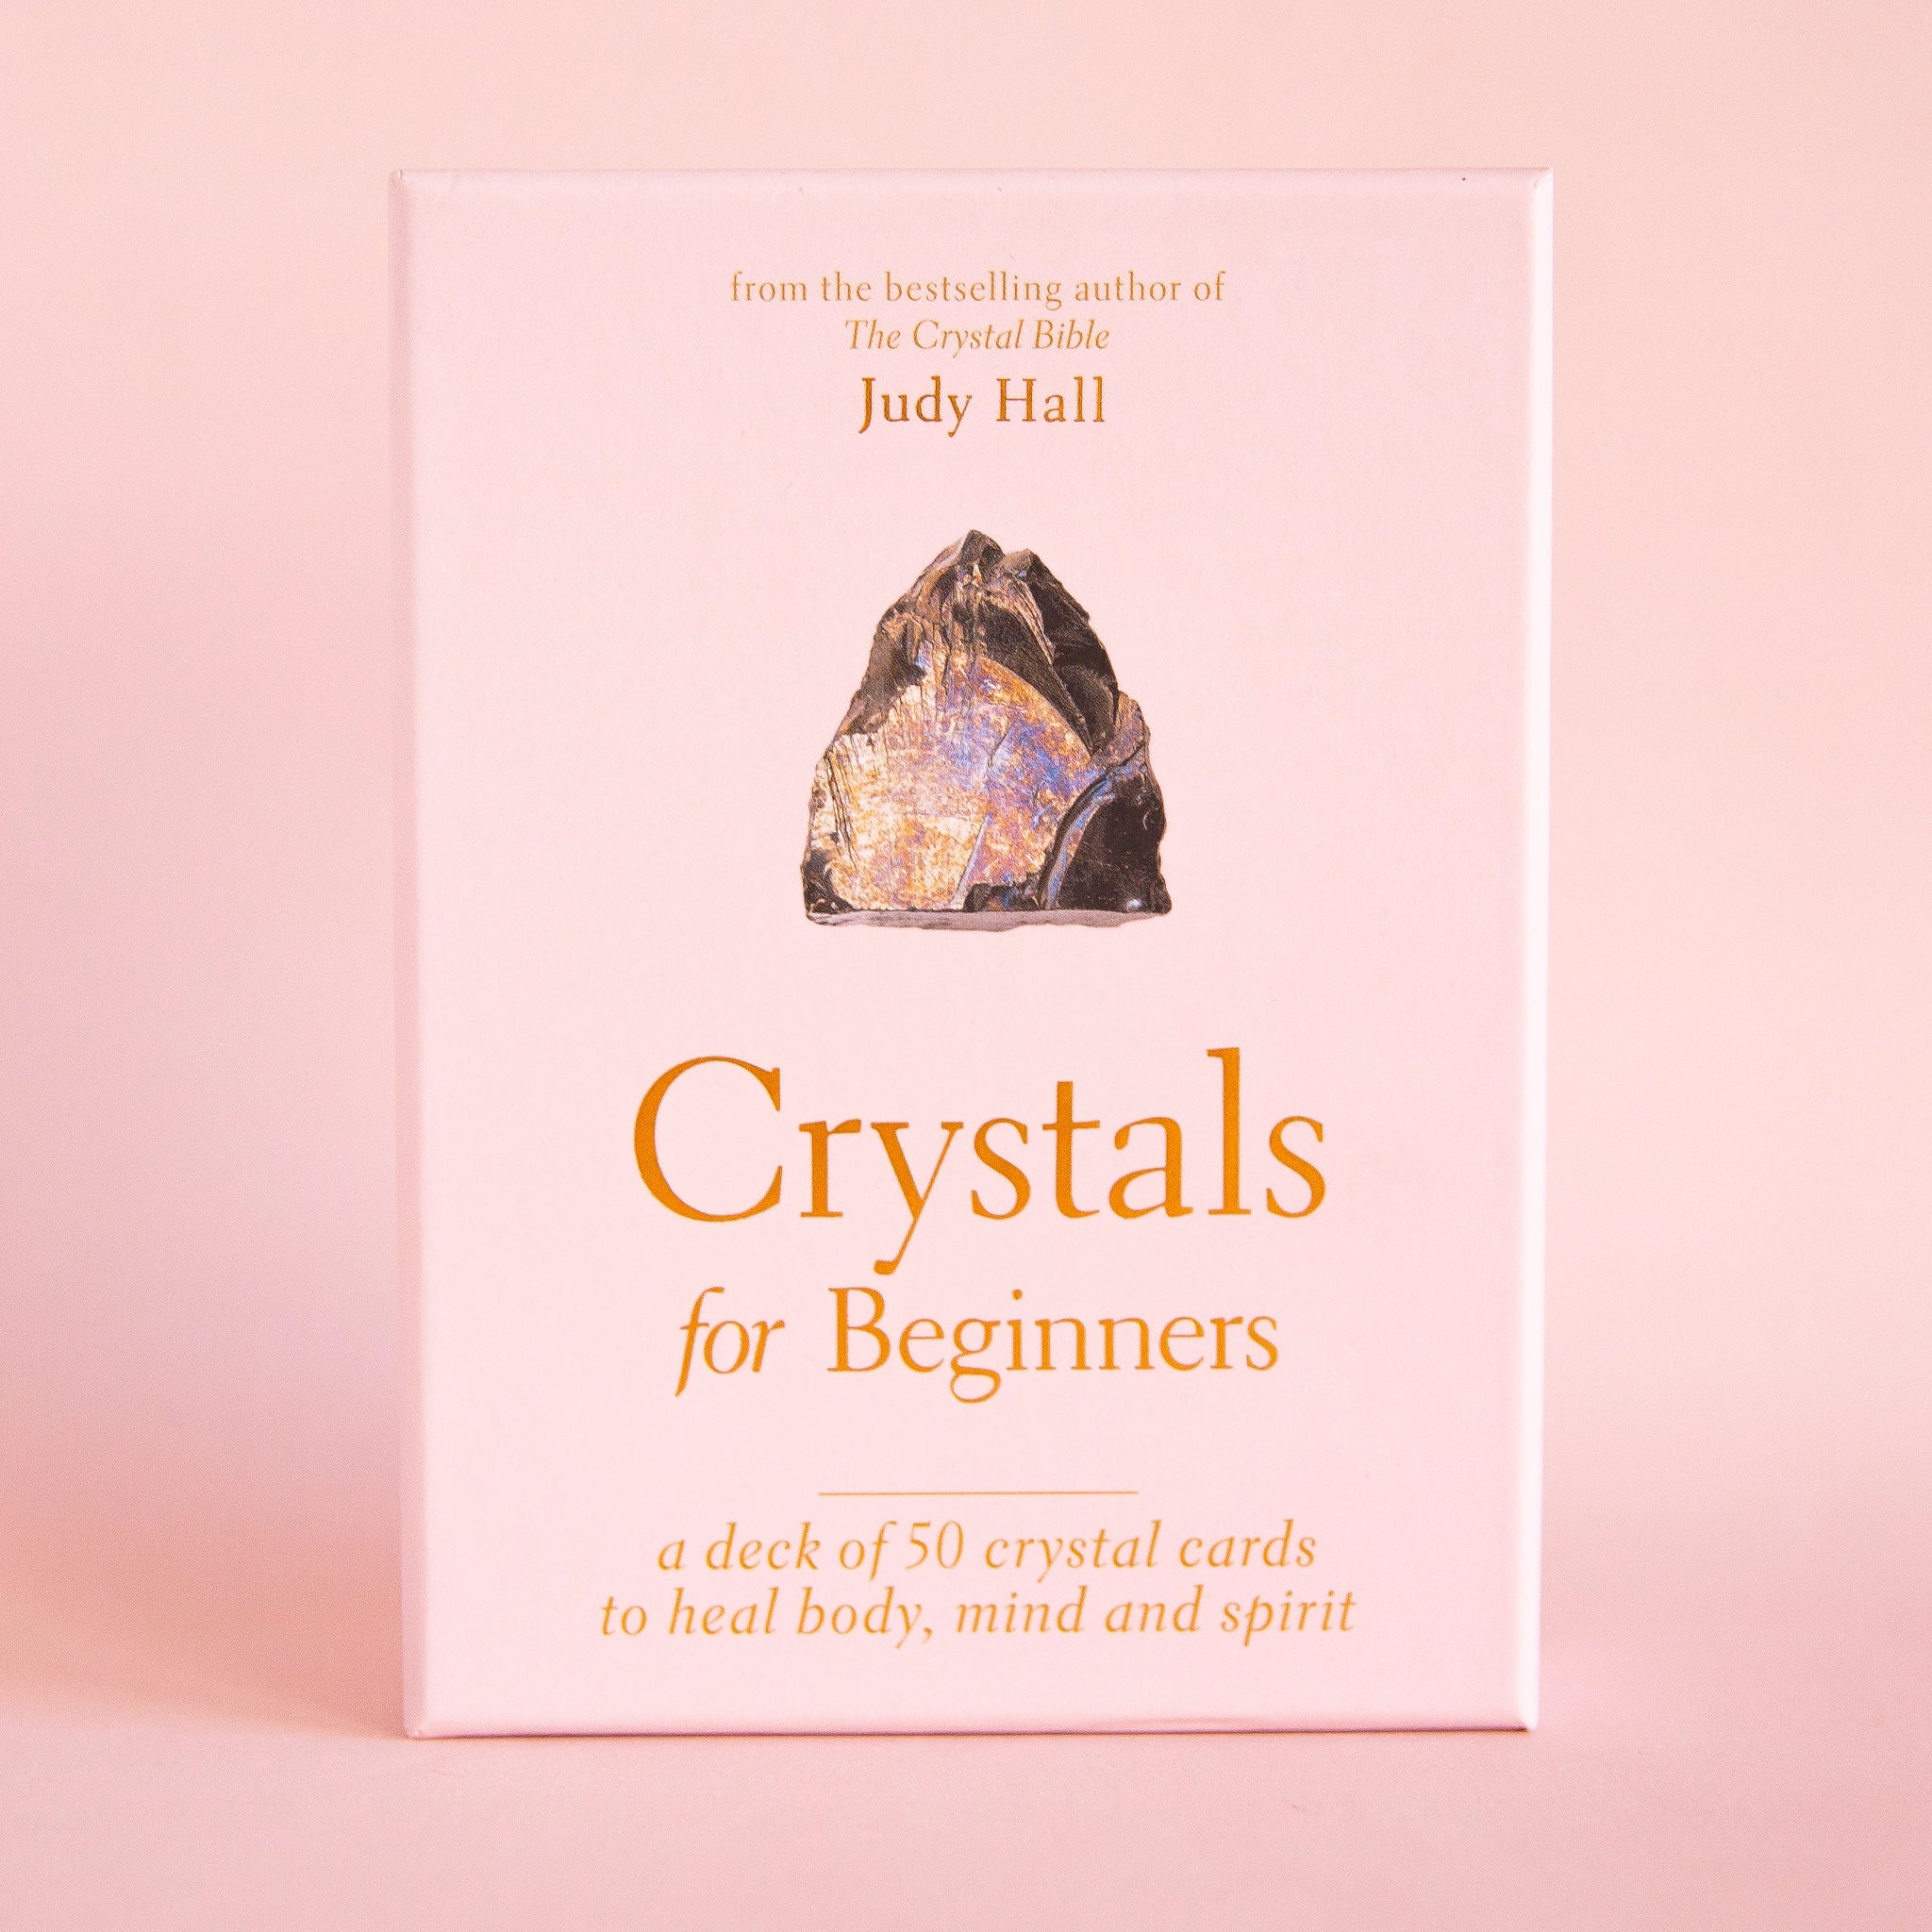 A deck of cards with a cover that has a crystals and text that reads, "Crystals for Beginners, a deck of 50 crystal cards to heal body, mind and spirit" in mustard yellow writing.